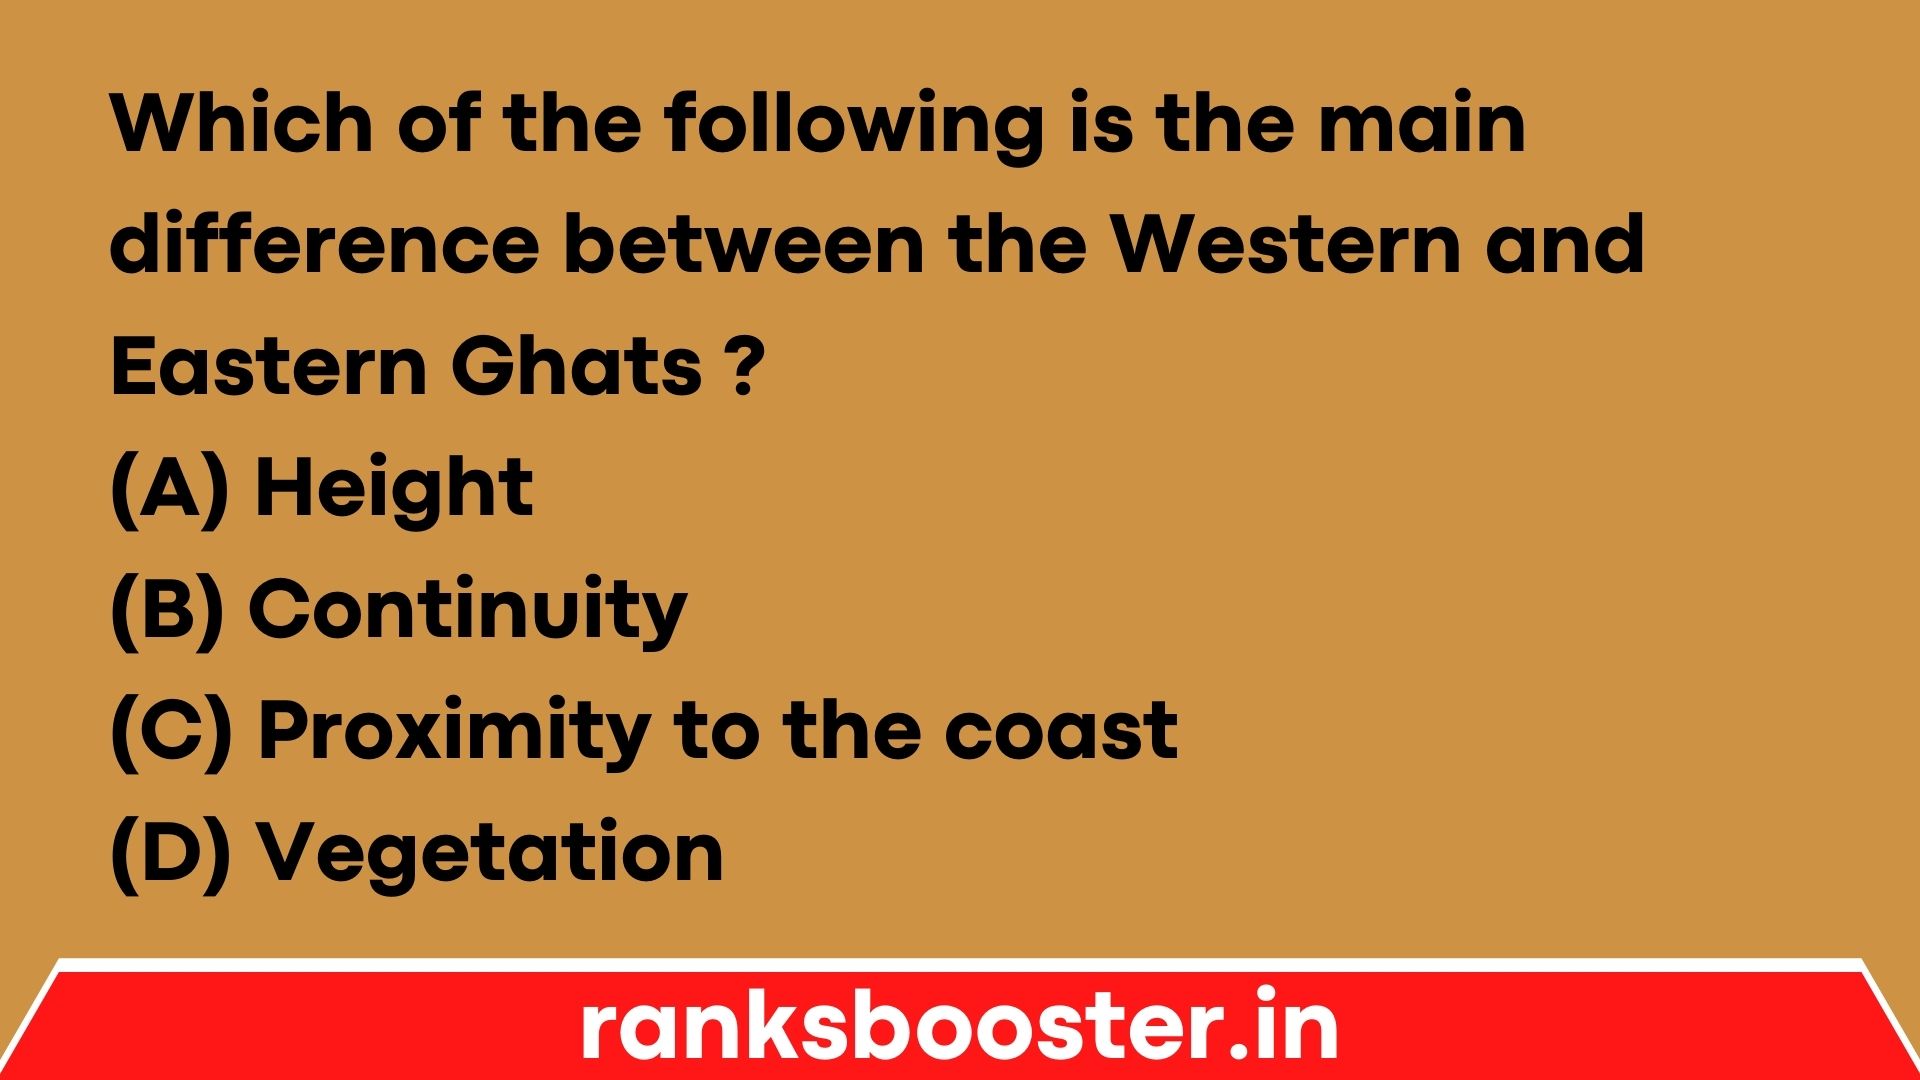 Which of the following is the main difference between the Western and Eastern Ghats ? (A) Height (B) Continuity (C) Proximity to the coast (D) Vegetation